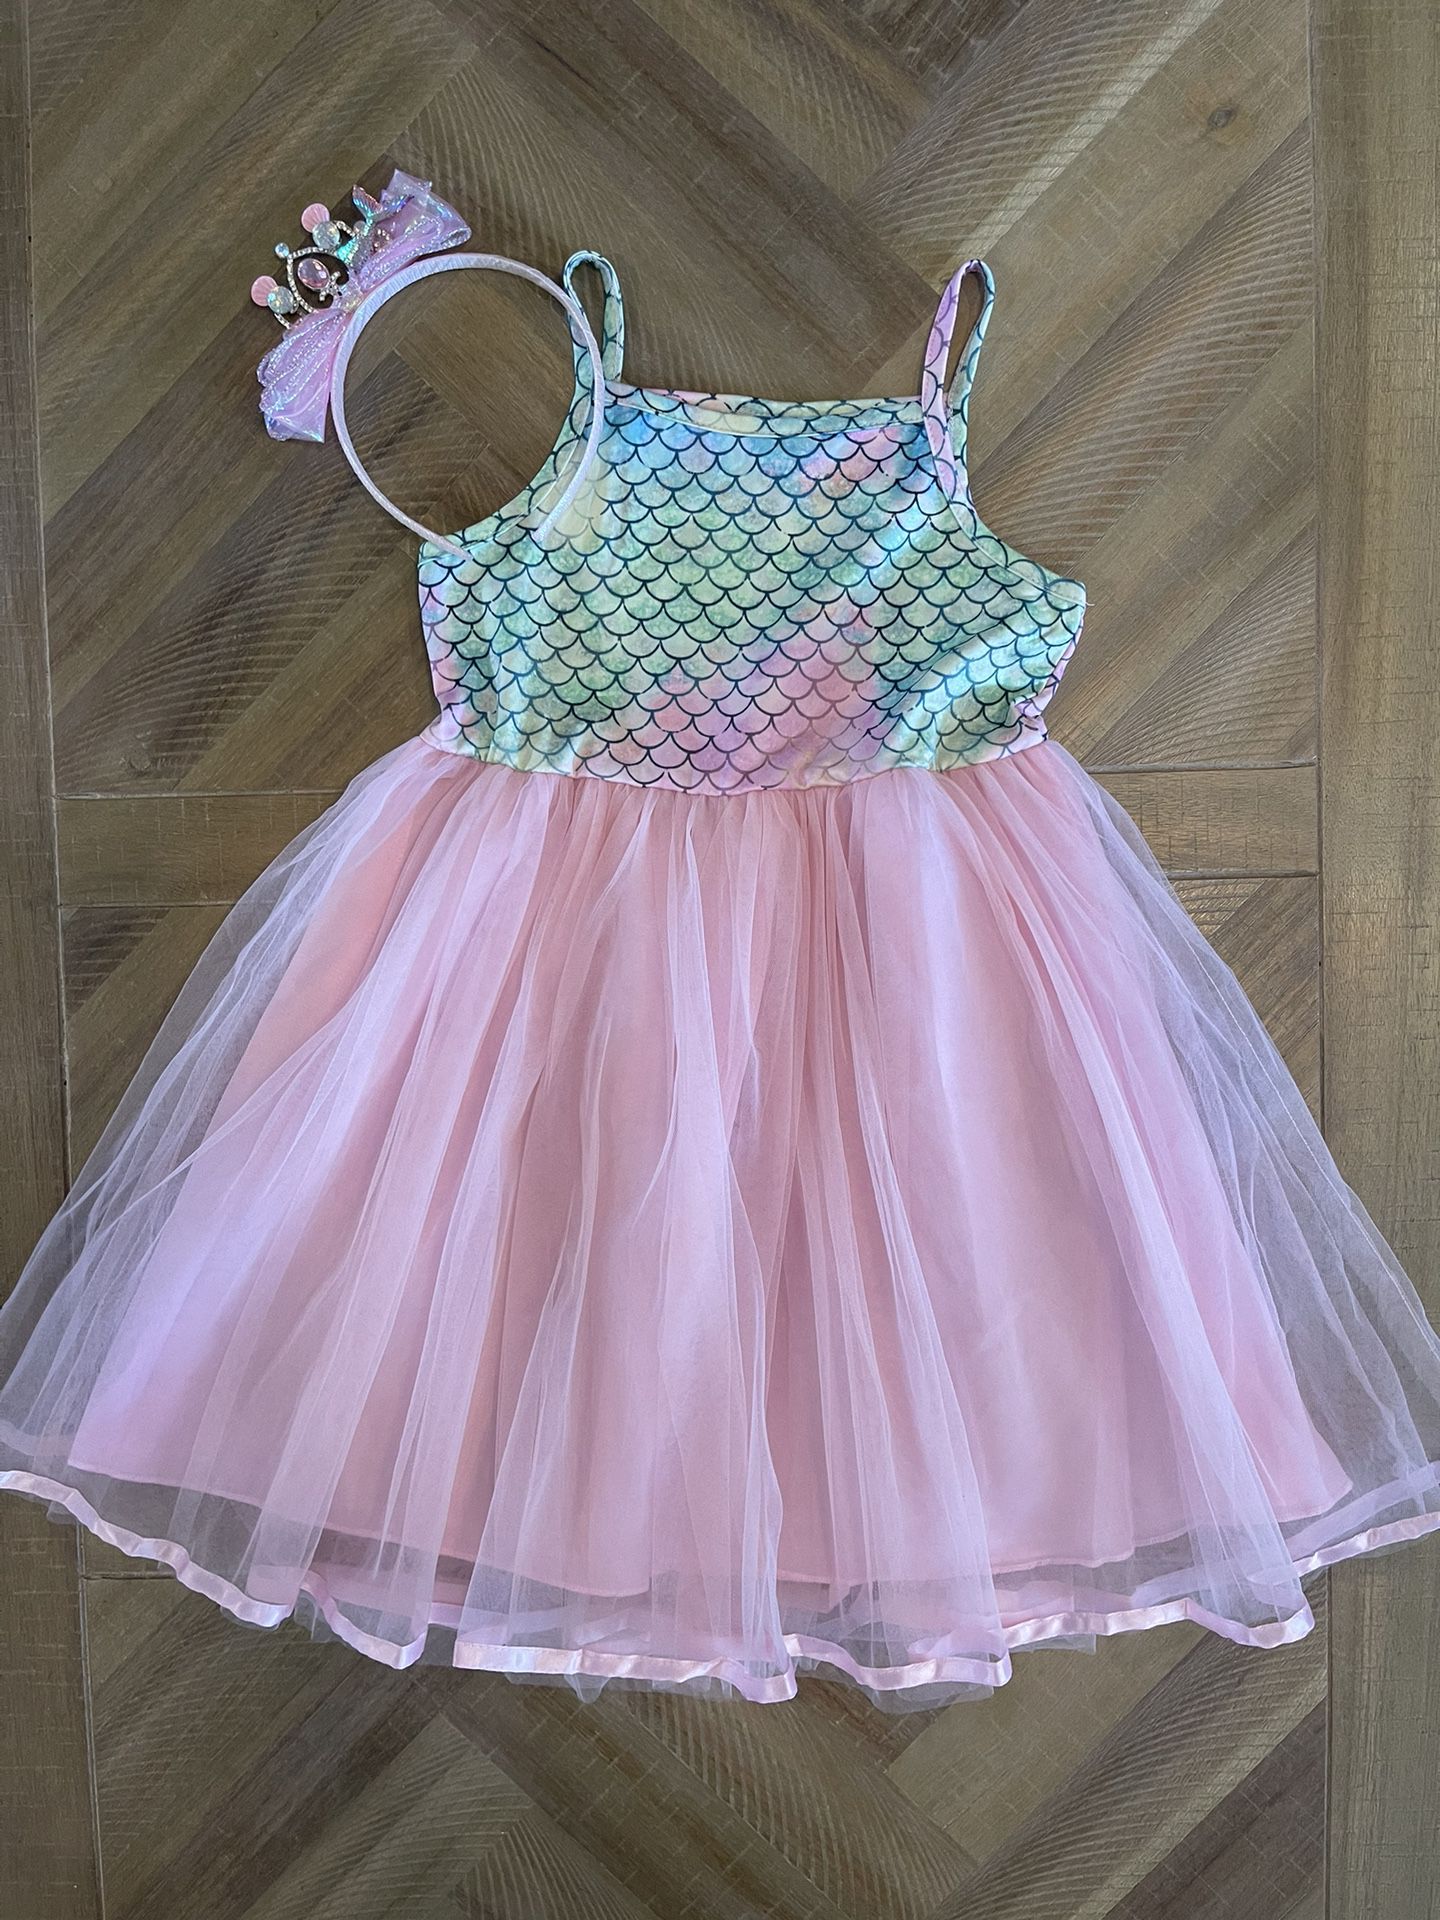 Mermaid Birthday Party Dress Size 6&7 $20 North east 